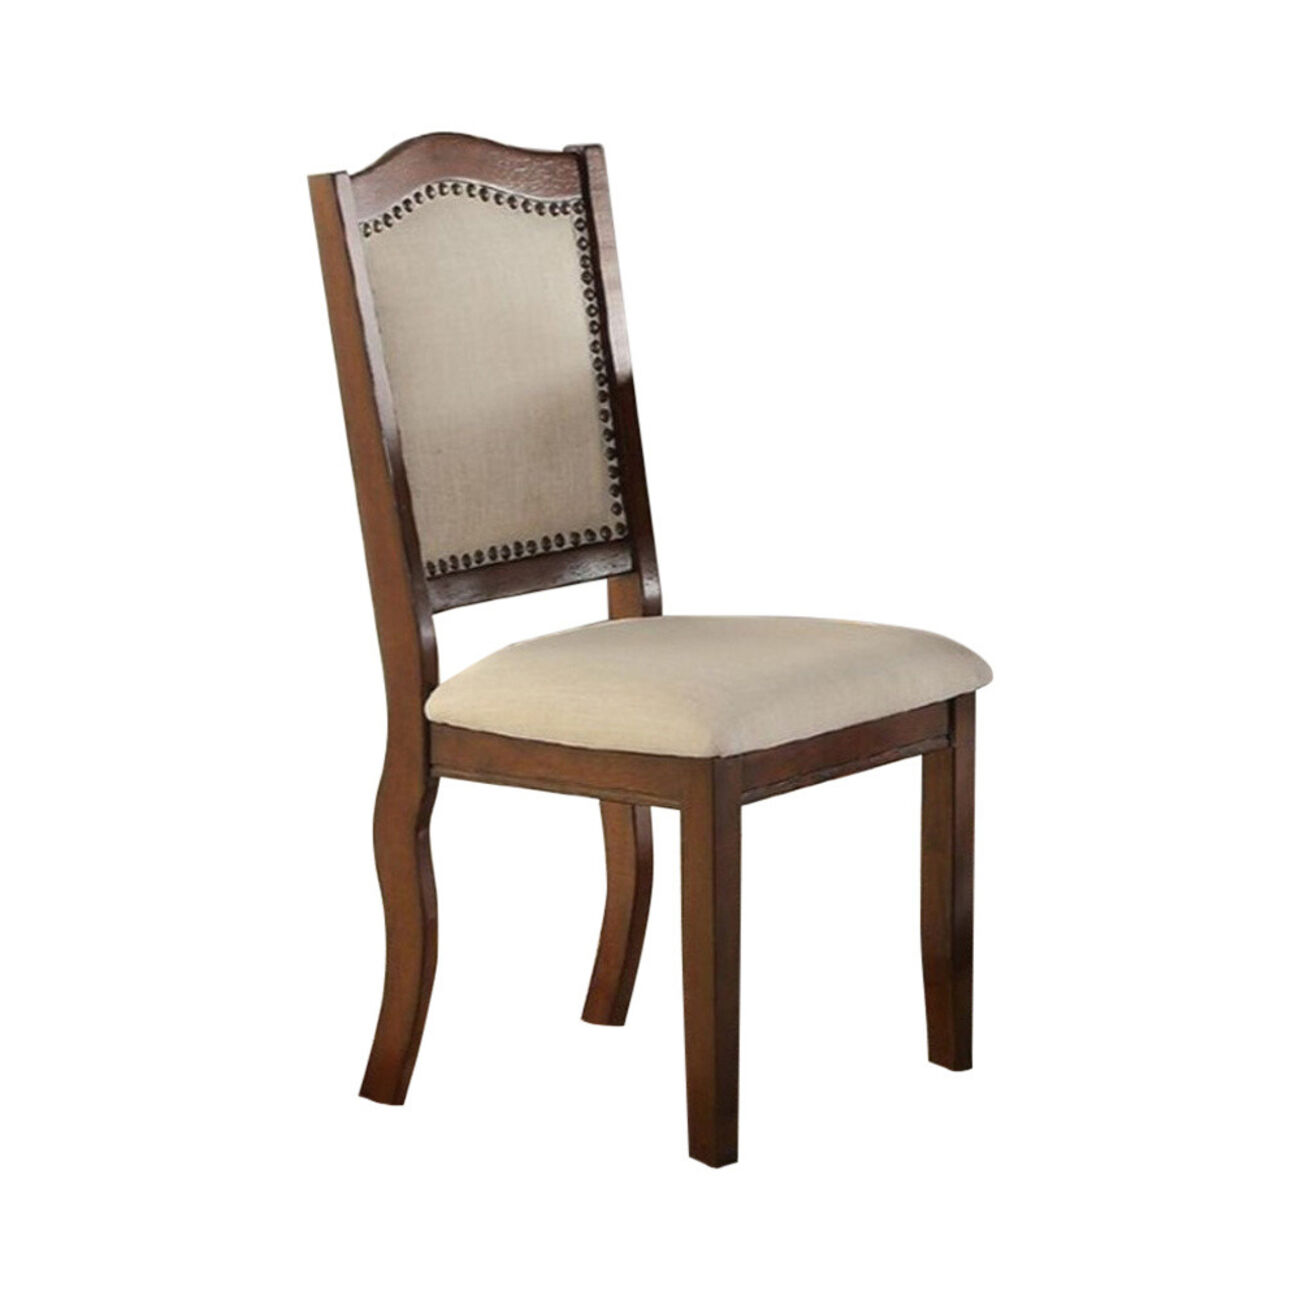 Rubber Wood Dining Chair, Set Of 2, Brown And Cream